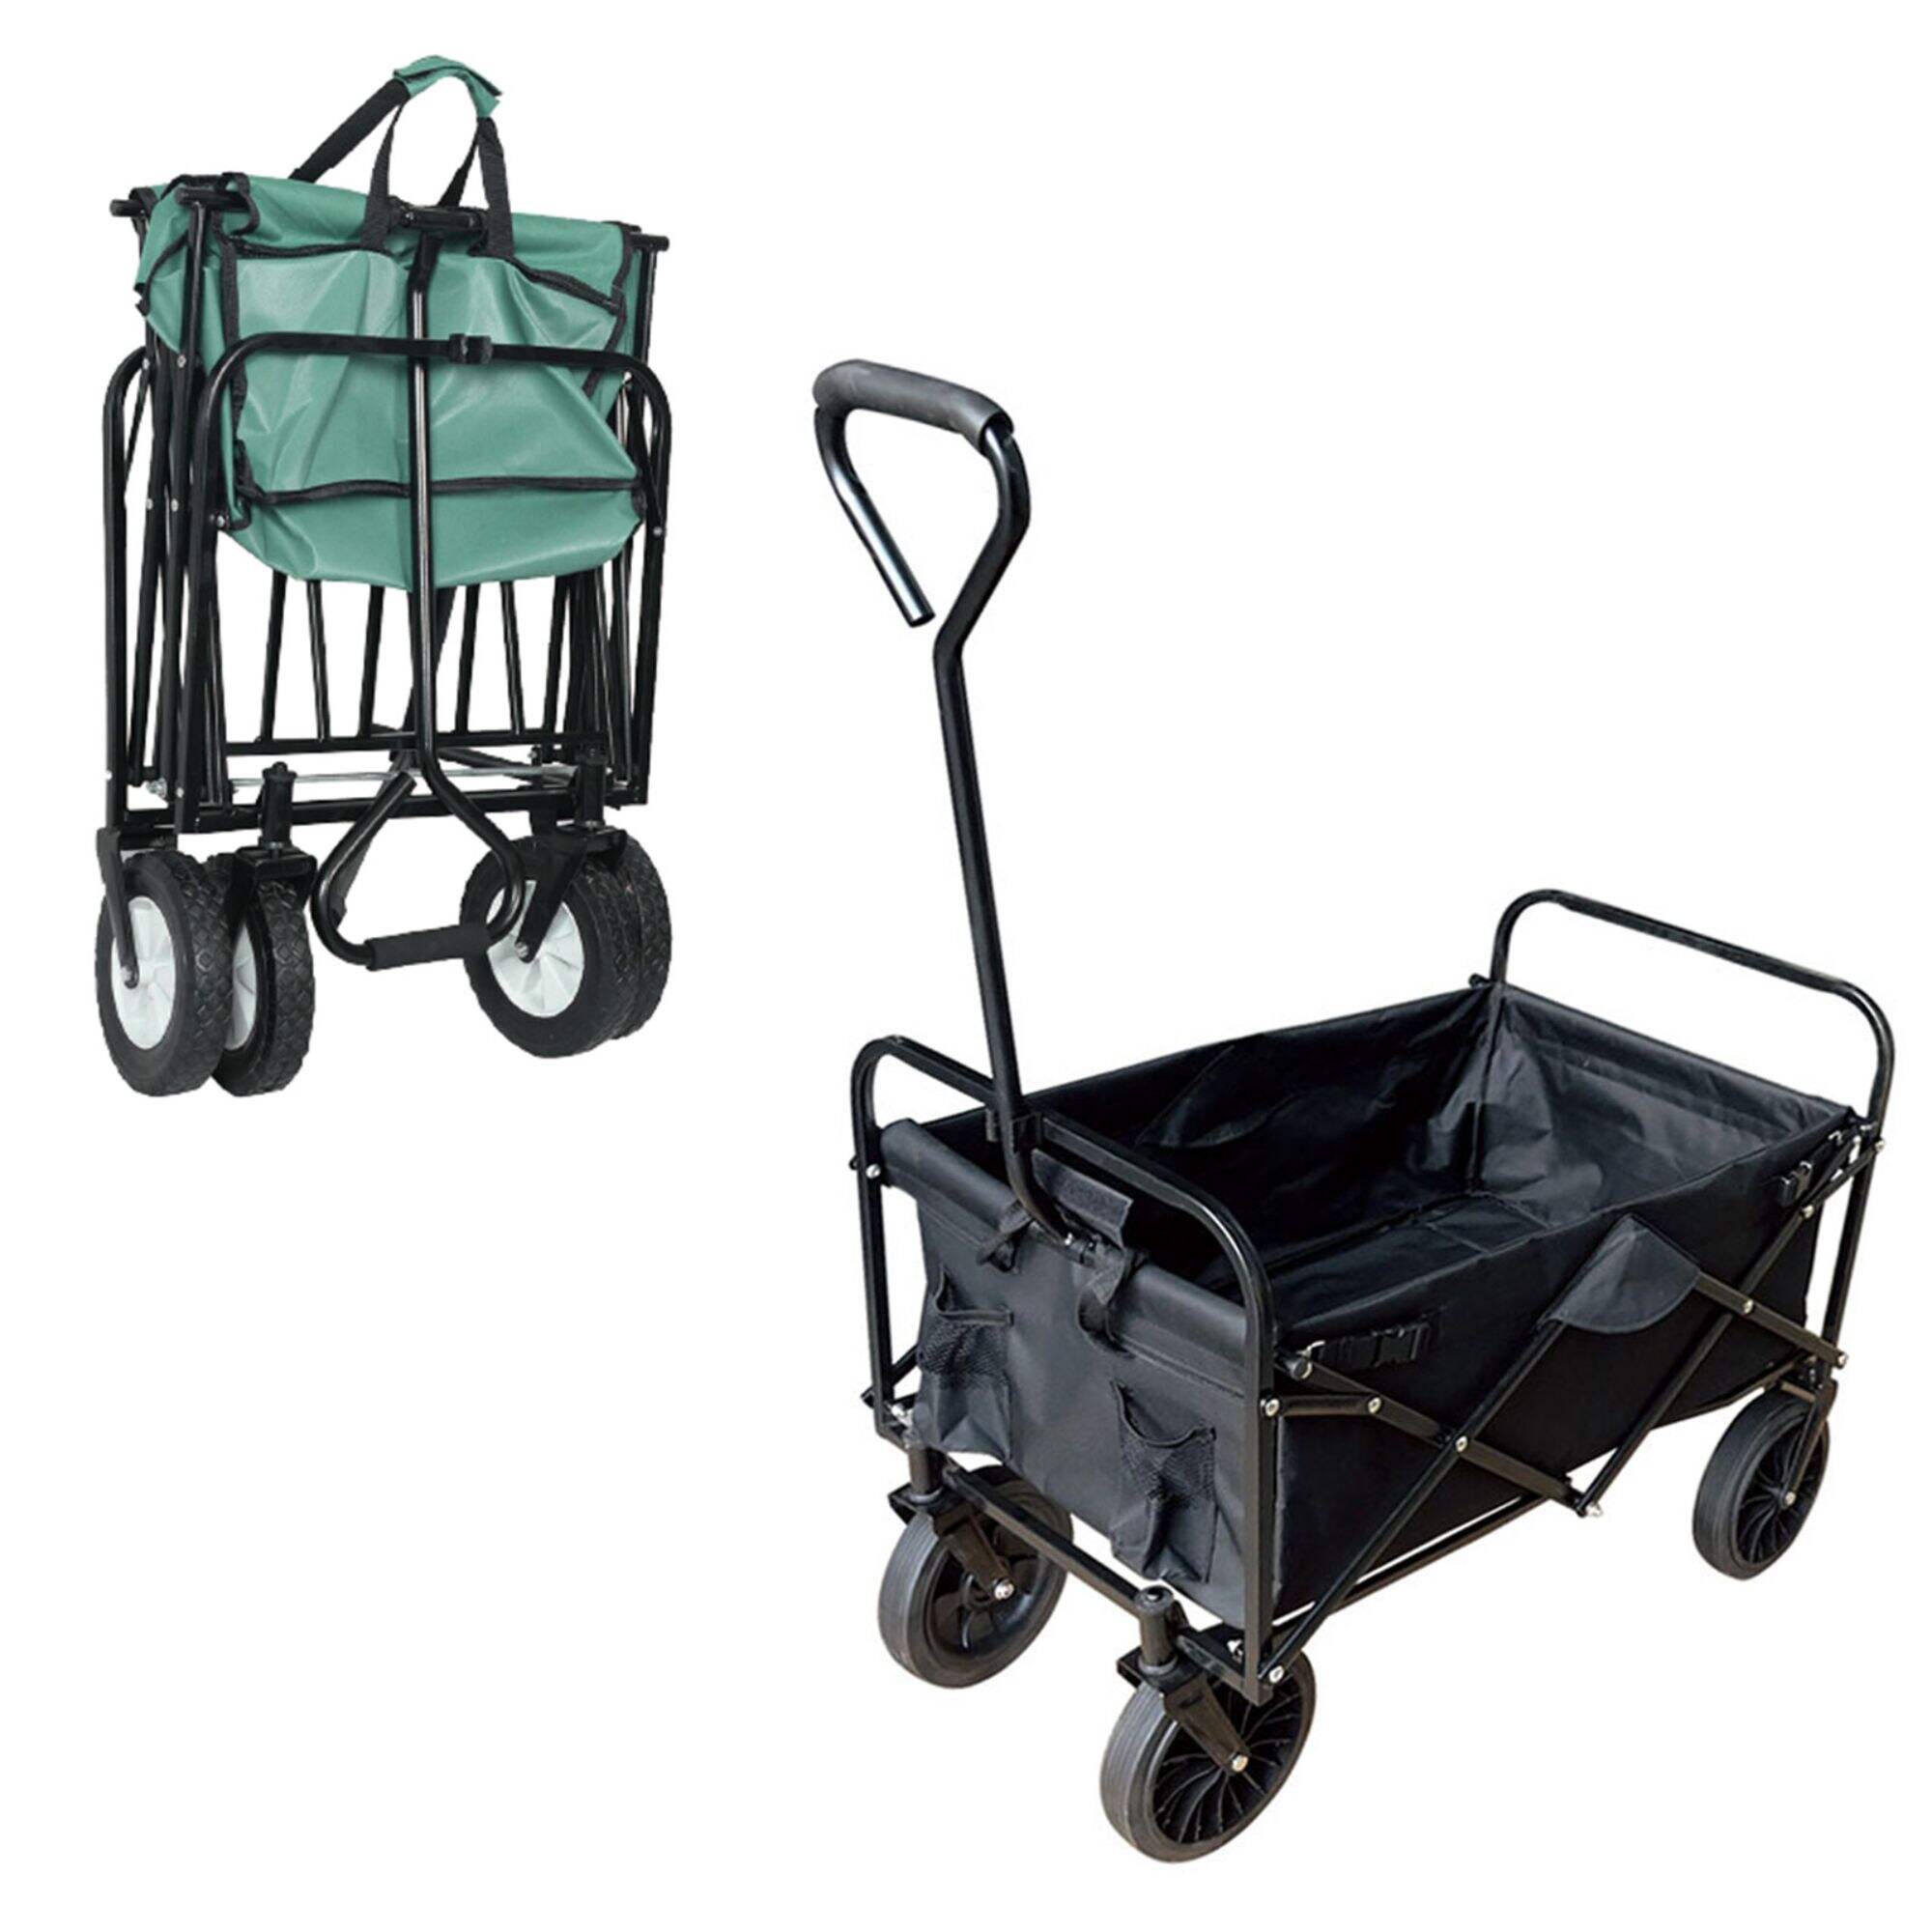 GT1801 Folding Wagon, Collapsible Camping Wagon Cart, for Outdoor